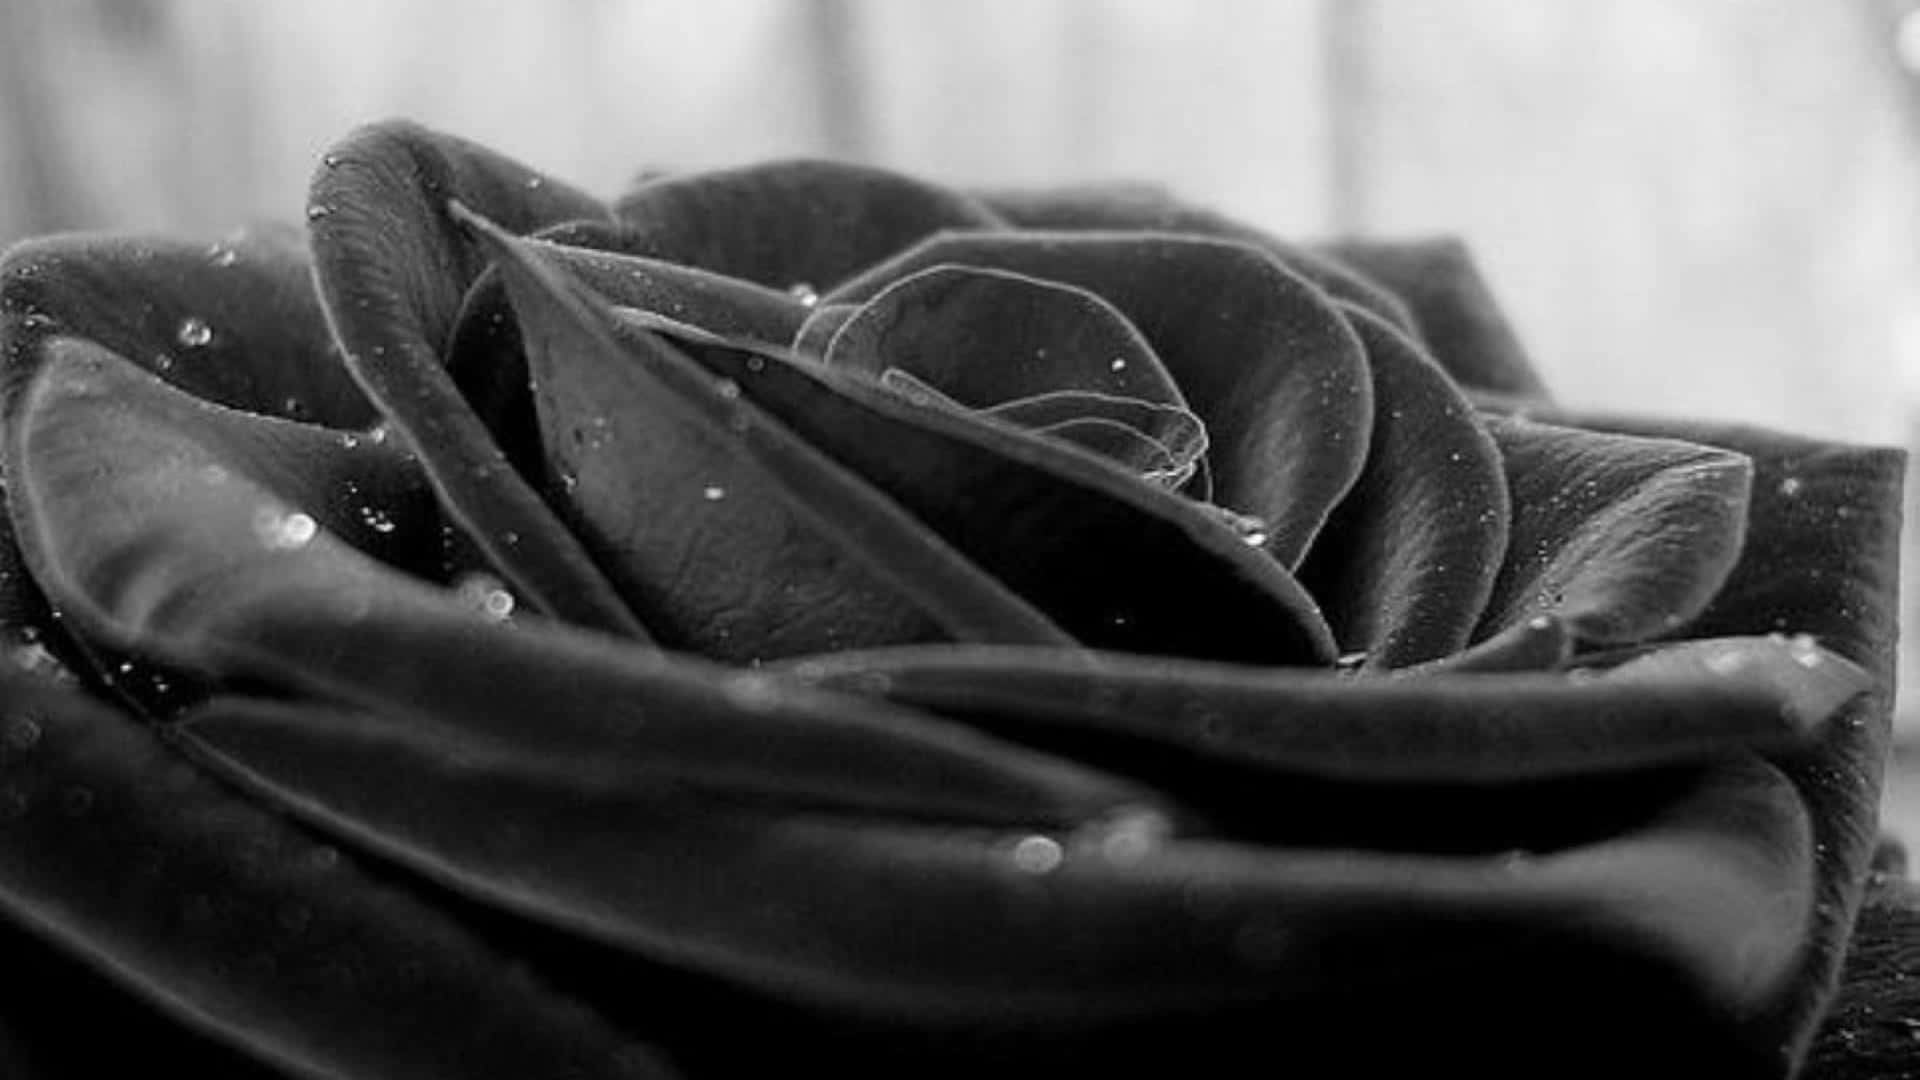 "The power of a Black Rose - its beauty and resilience is unmatched"